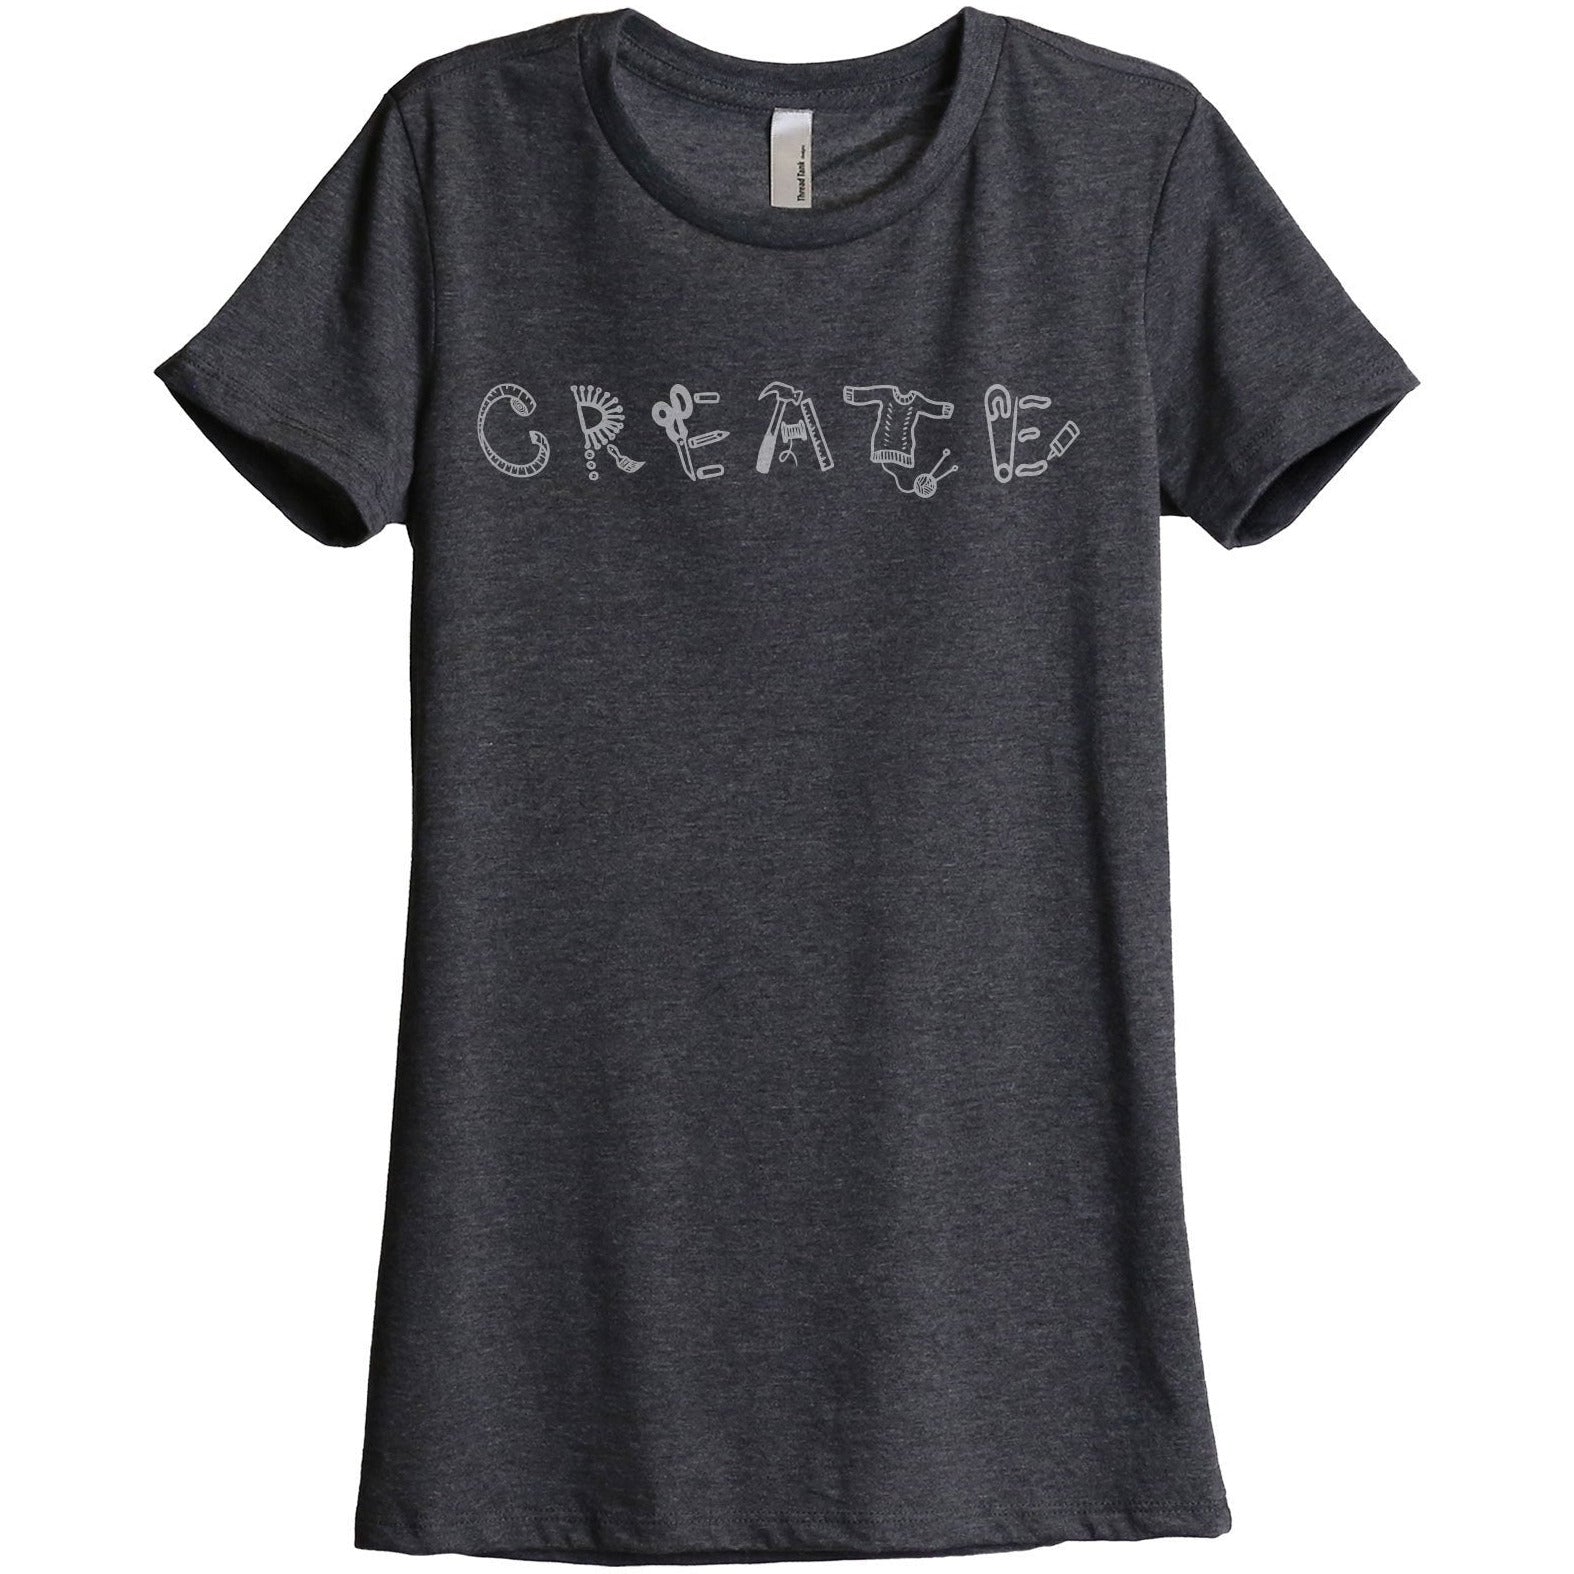 Create Women's Relaxed Crewneck T-Shirt Top Tee Charcoal Grey
